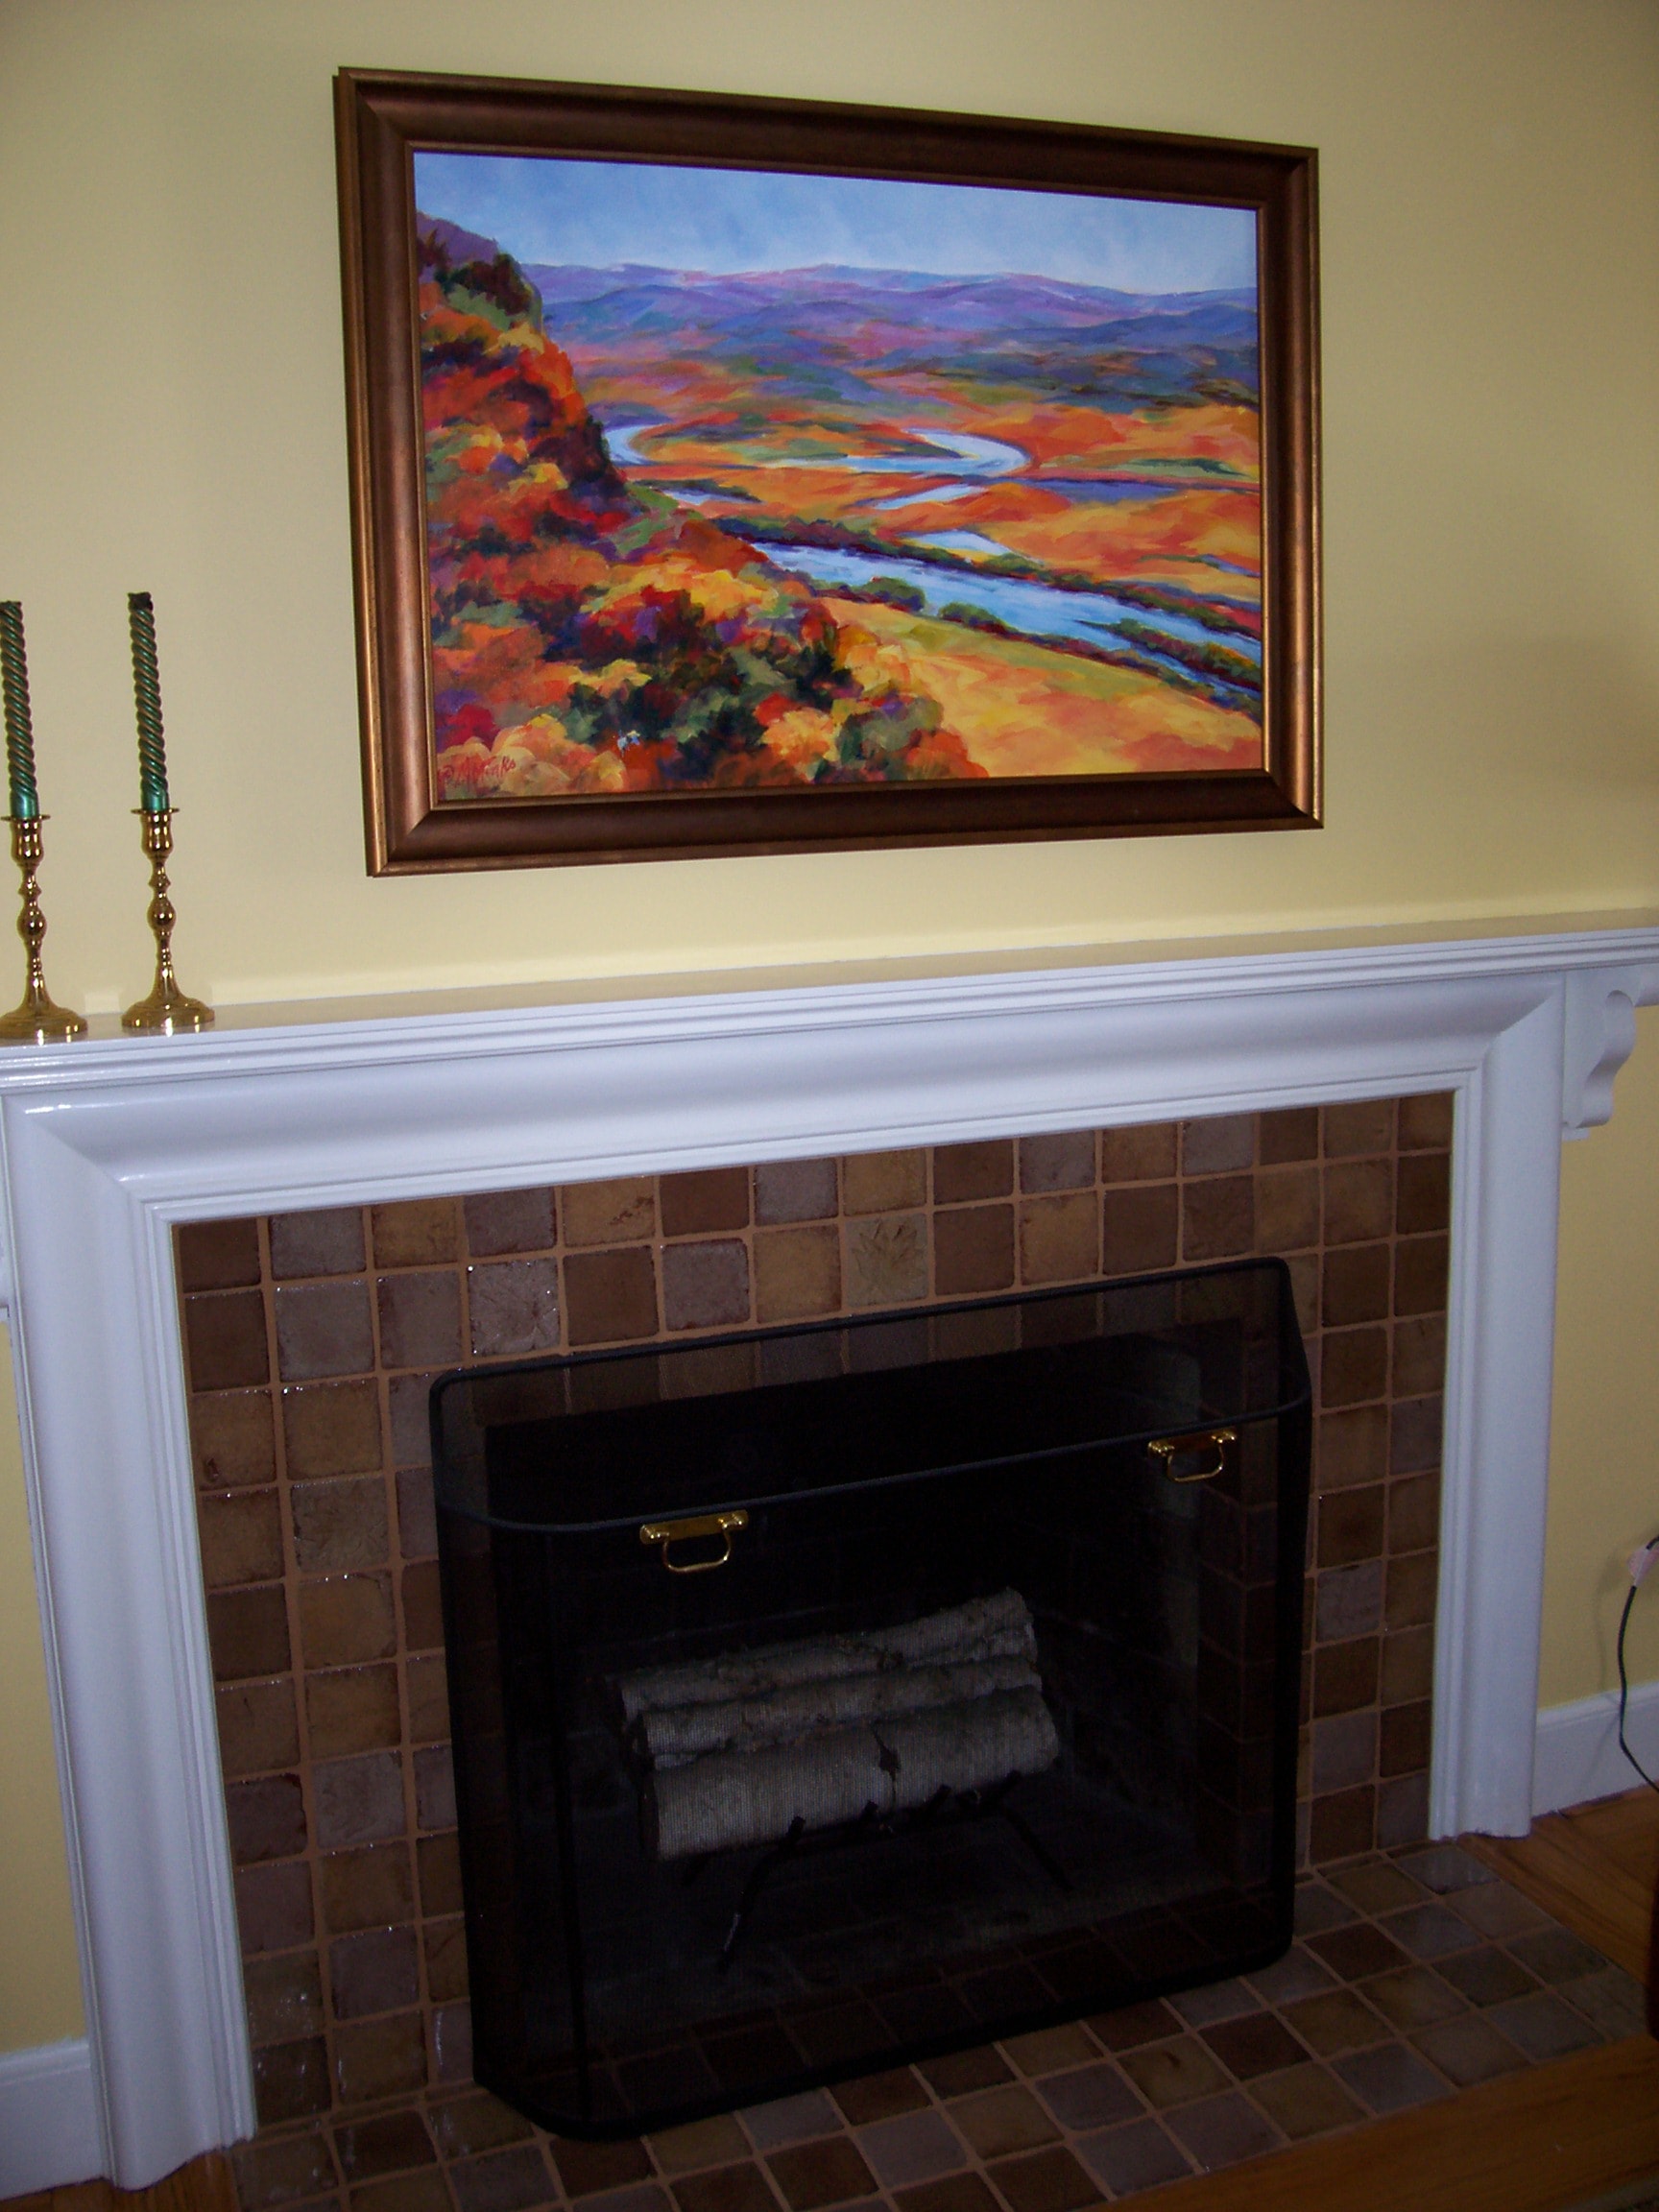 A painting of an aerial view of a river winding through a hilly autumn landscape above a fireplace